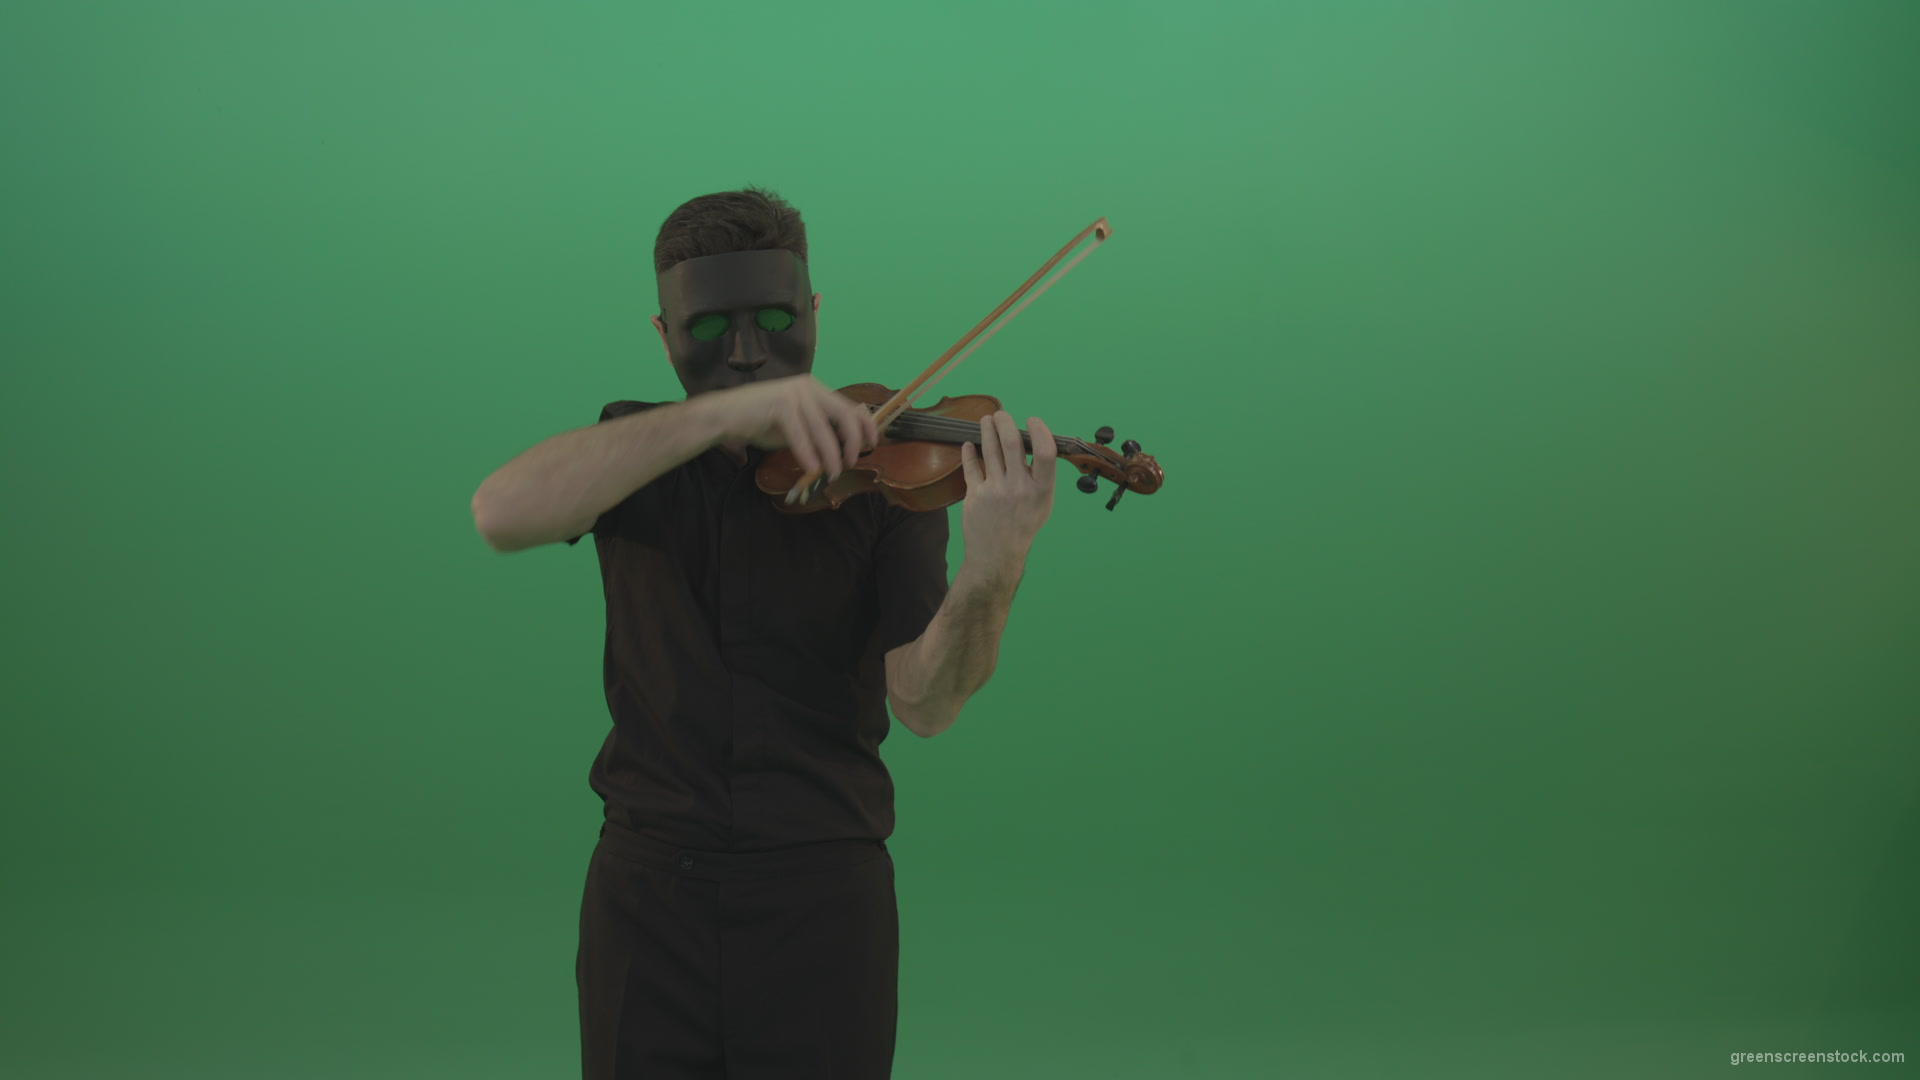 Man-in-black-shirt-and-mask-fast-play-violin-fiddle-strings-gothic-music-isolated-on-green-screen_009 Green Screen Stock